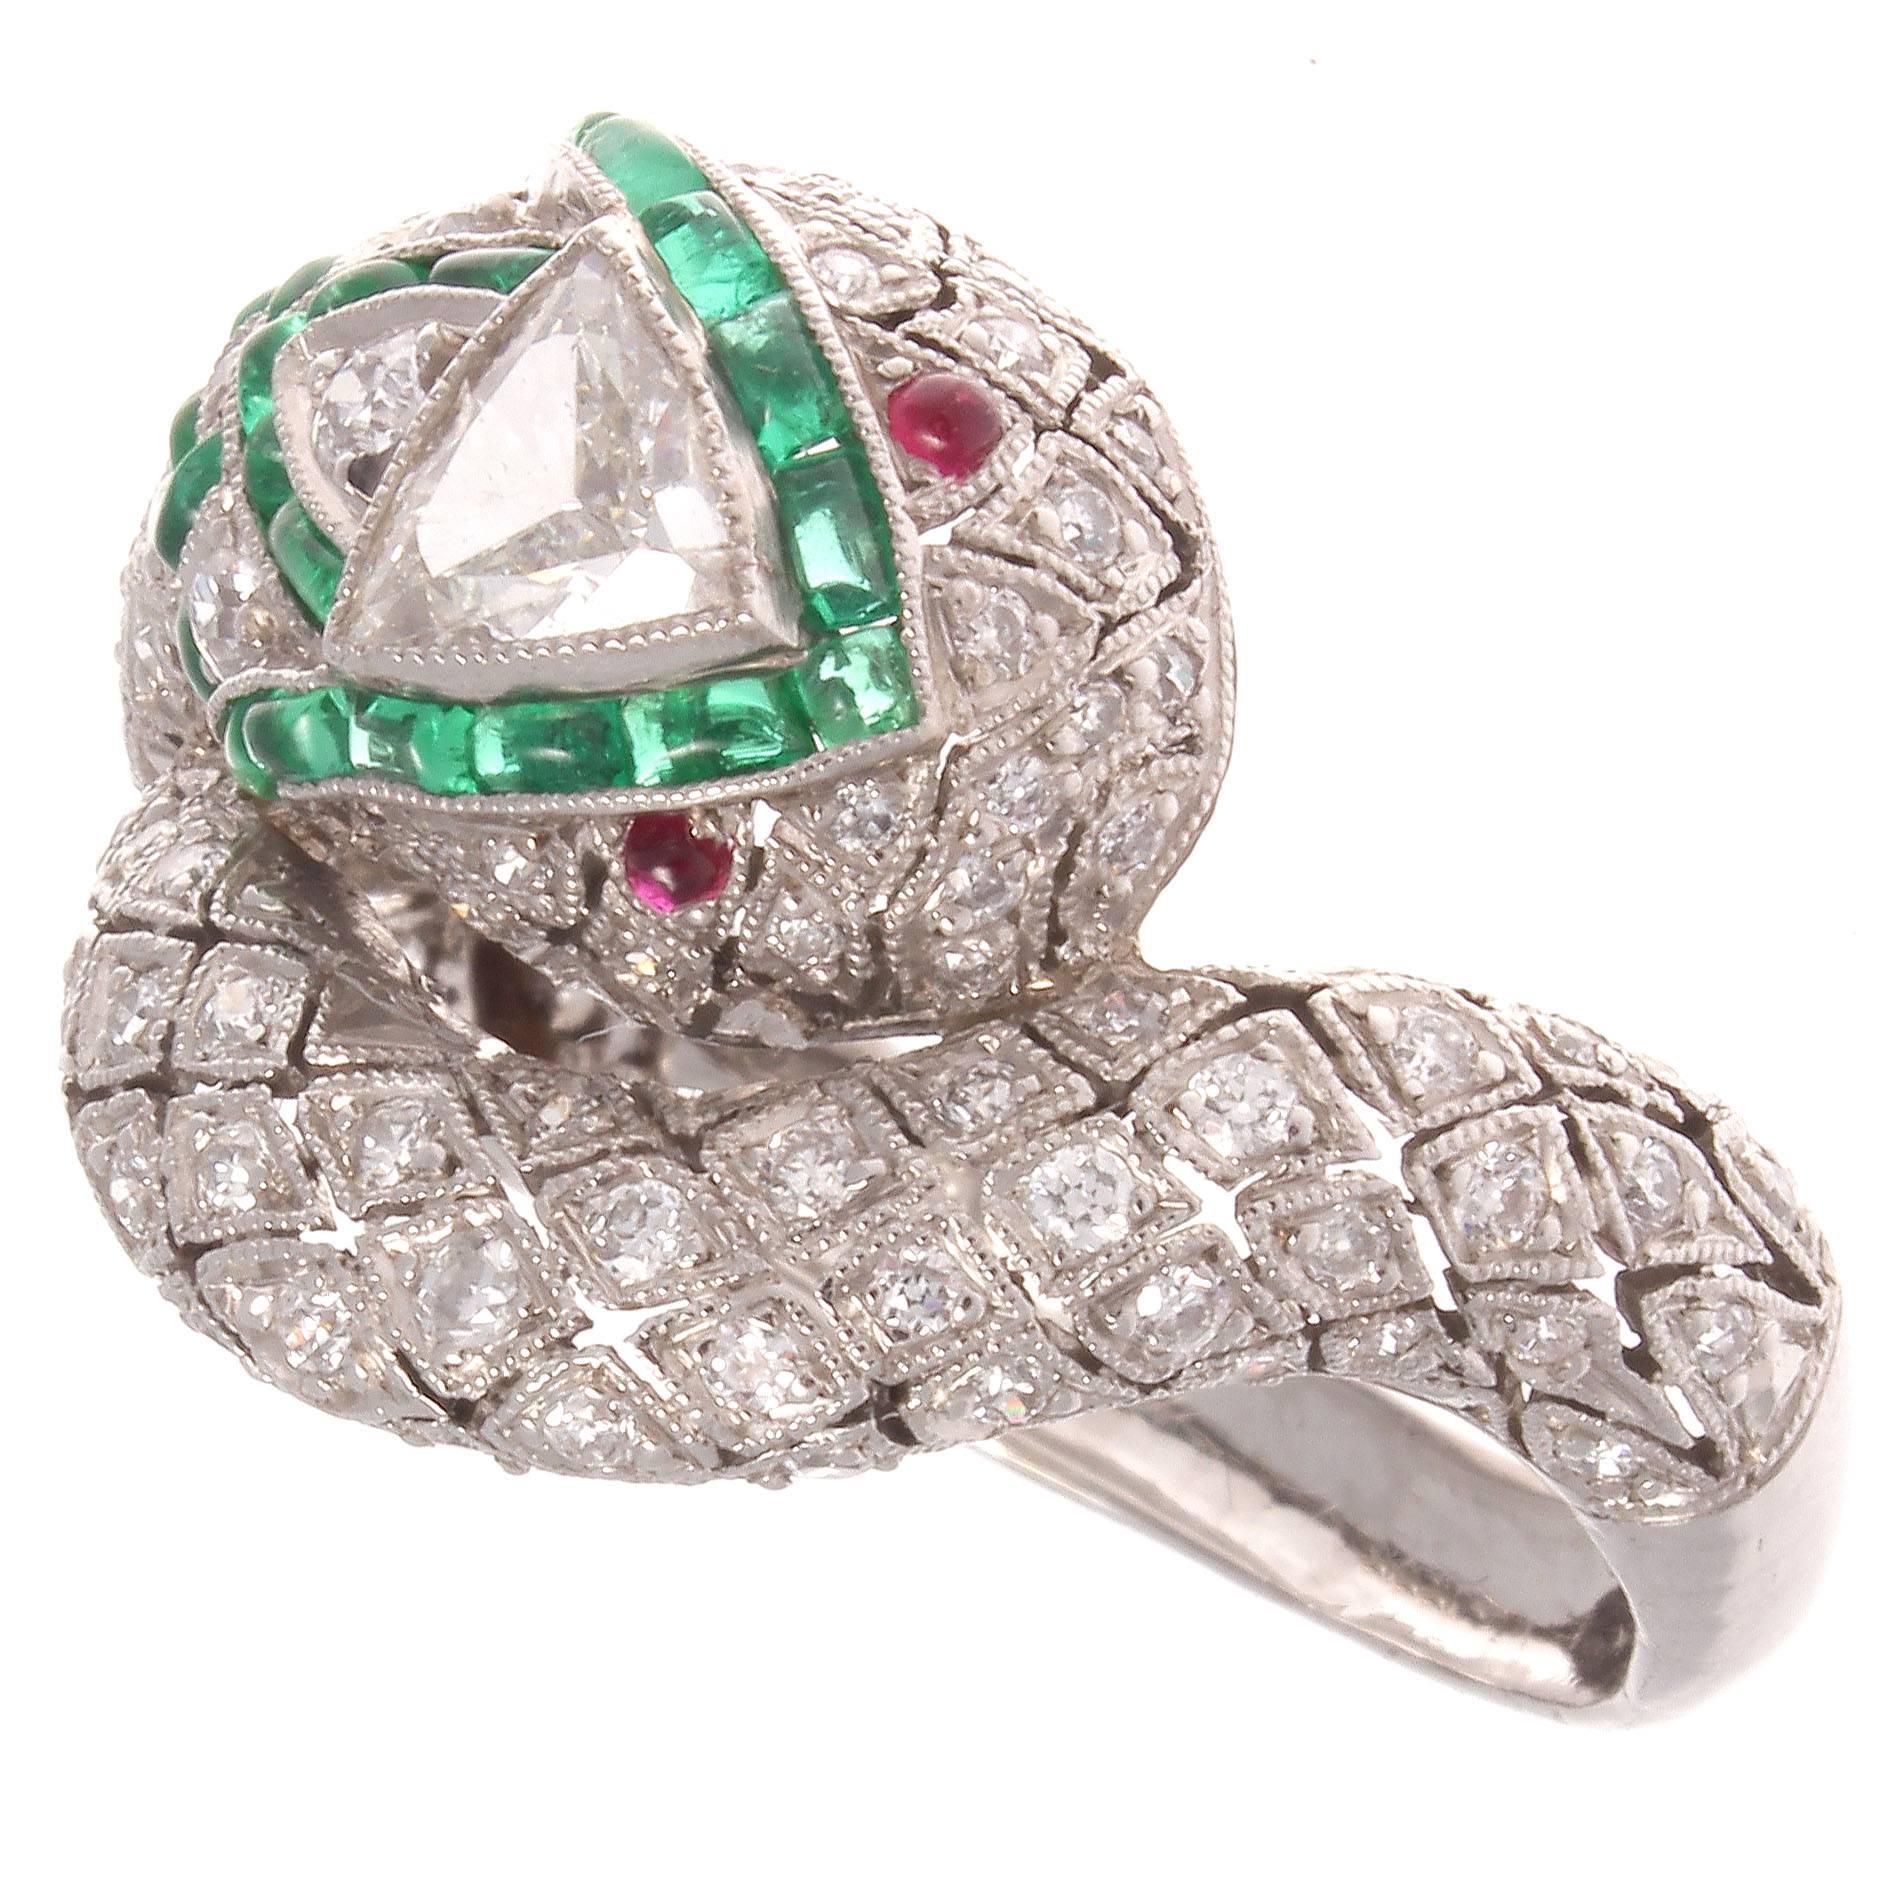 Snakes are great on the finger, not so much when you're hiking in the woods. Well designed with a triangle diamond head, ruby eyes and emerald accents on the head and body.

Ring size 7 1/4 and may be re-sized to fit.